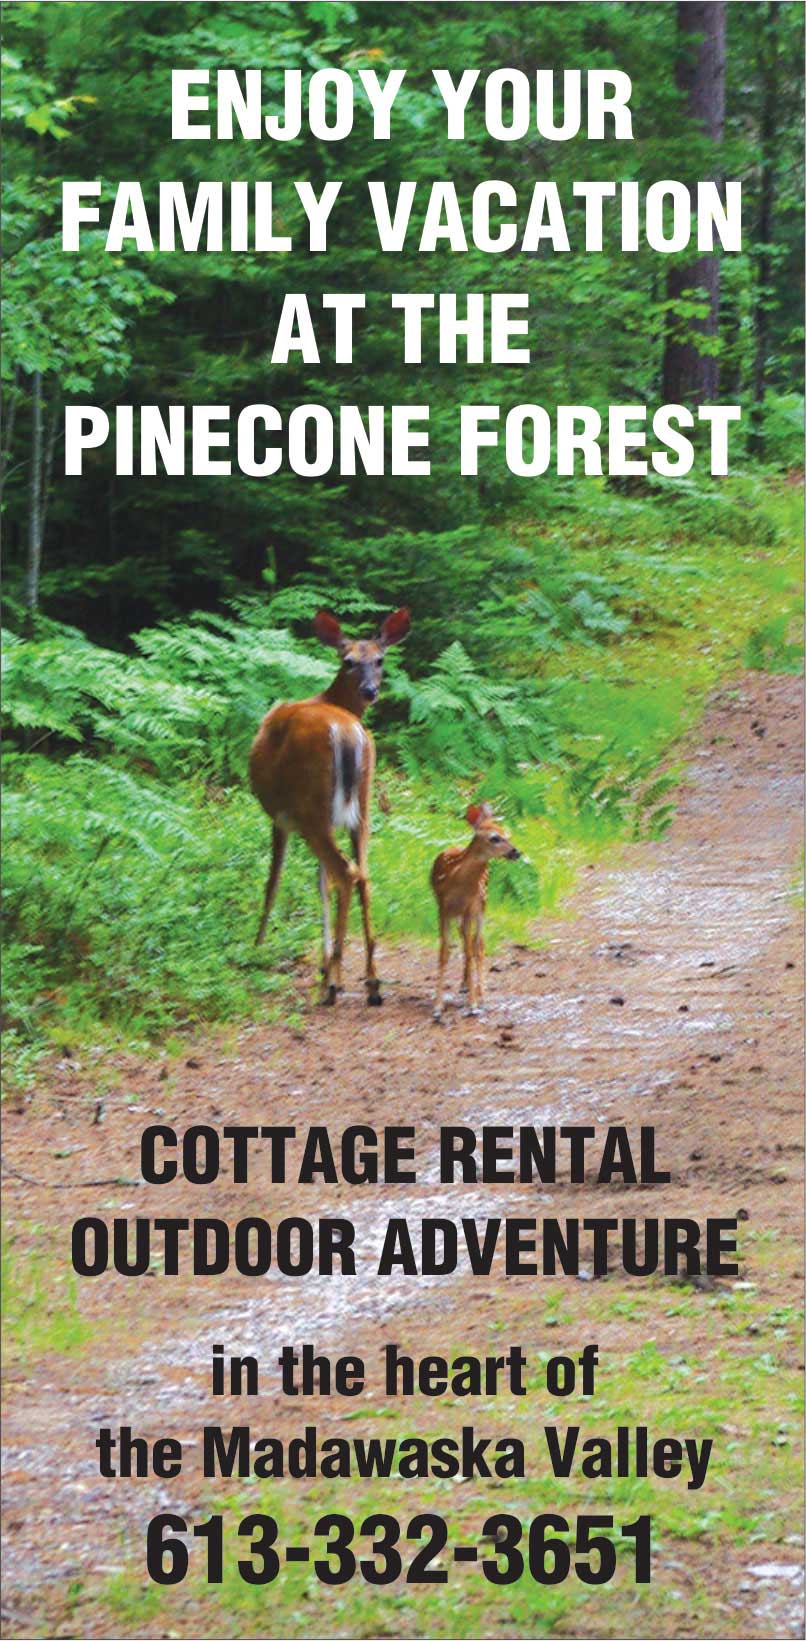 Enjoy Your Family Vacation at The Pinecone Forest--Cottage Rental, Outdoor Adventure